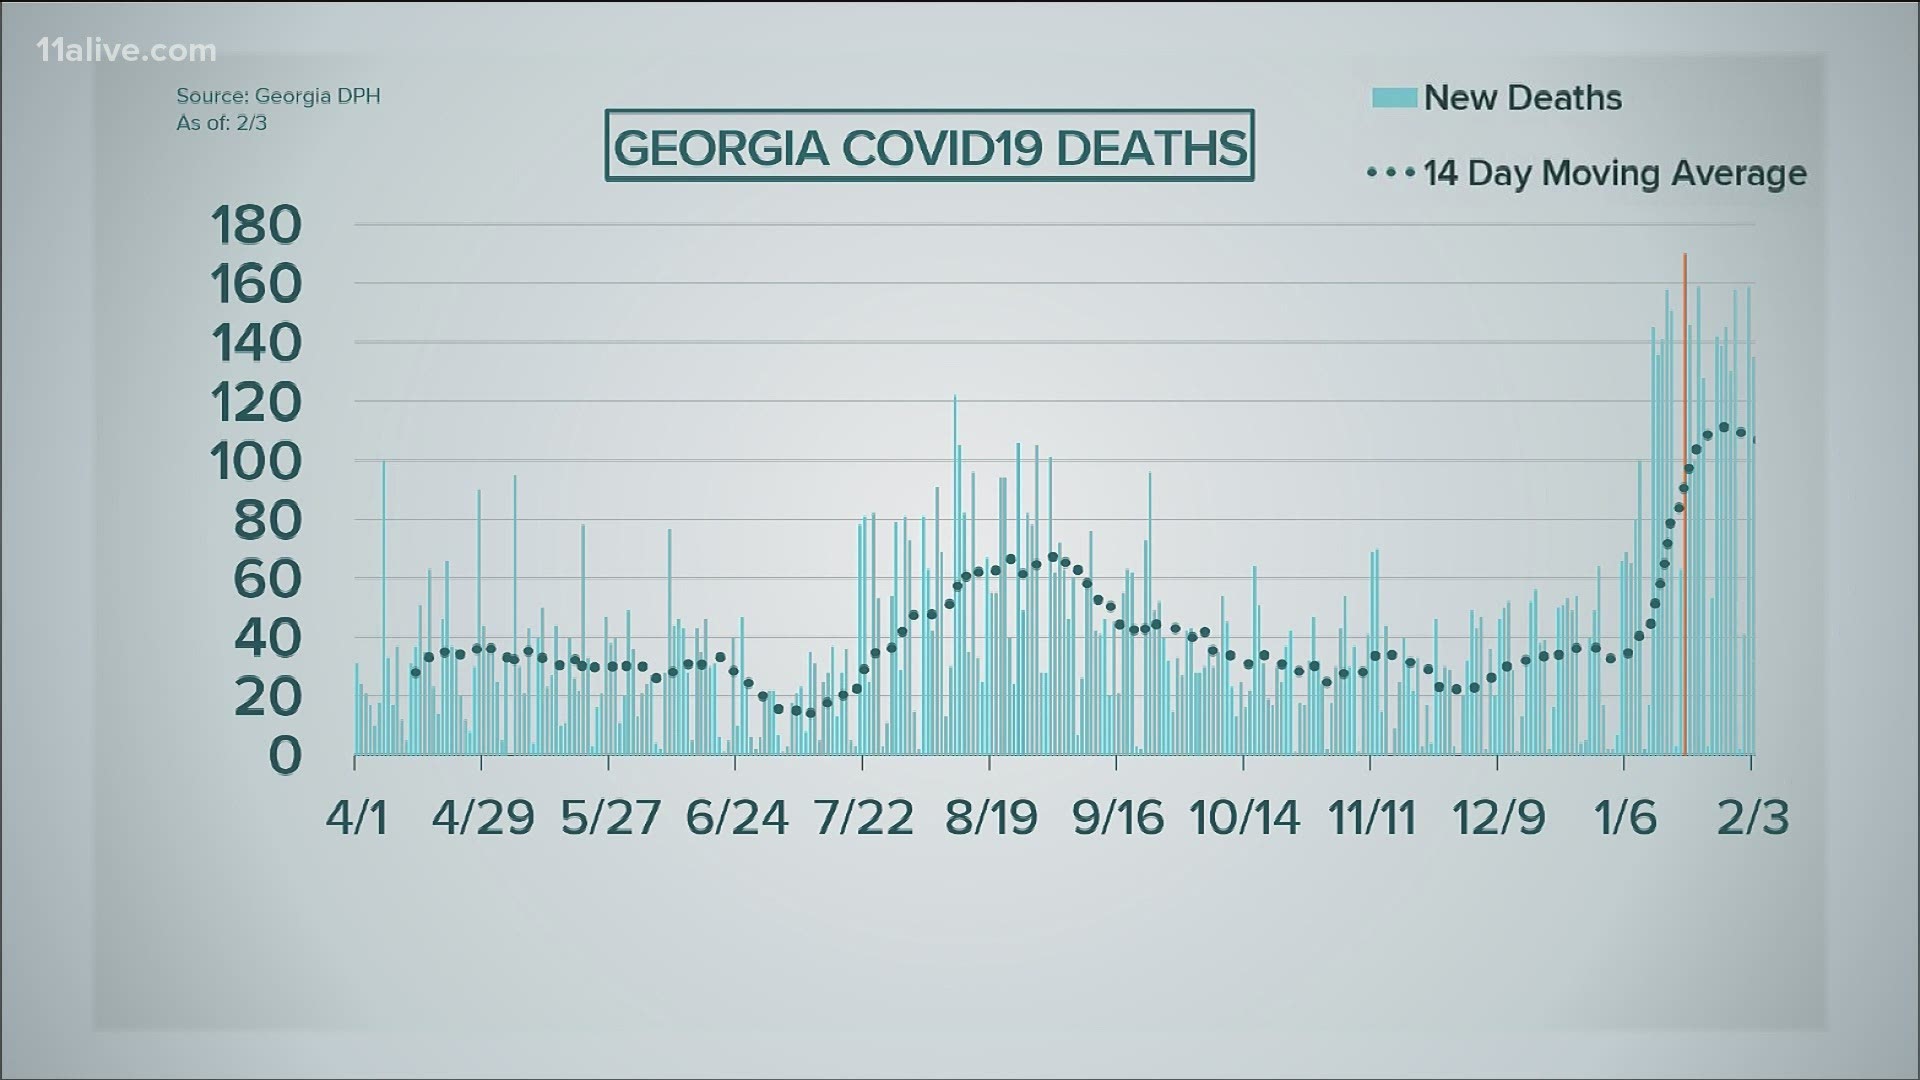 Deaths remain higher than the state's weekly average.